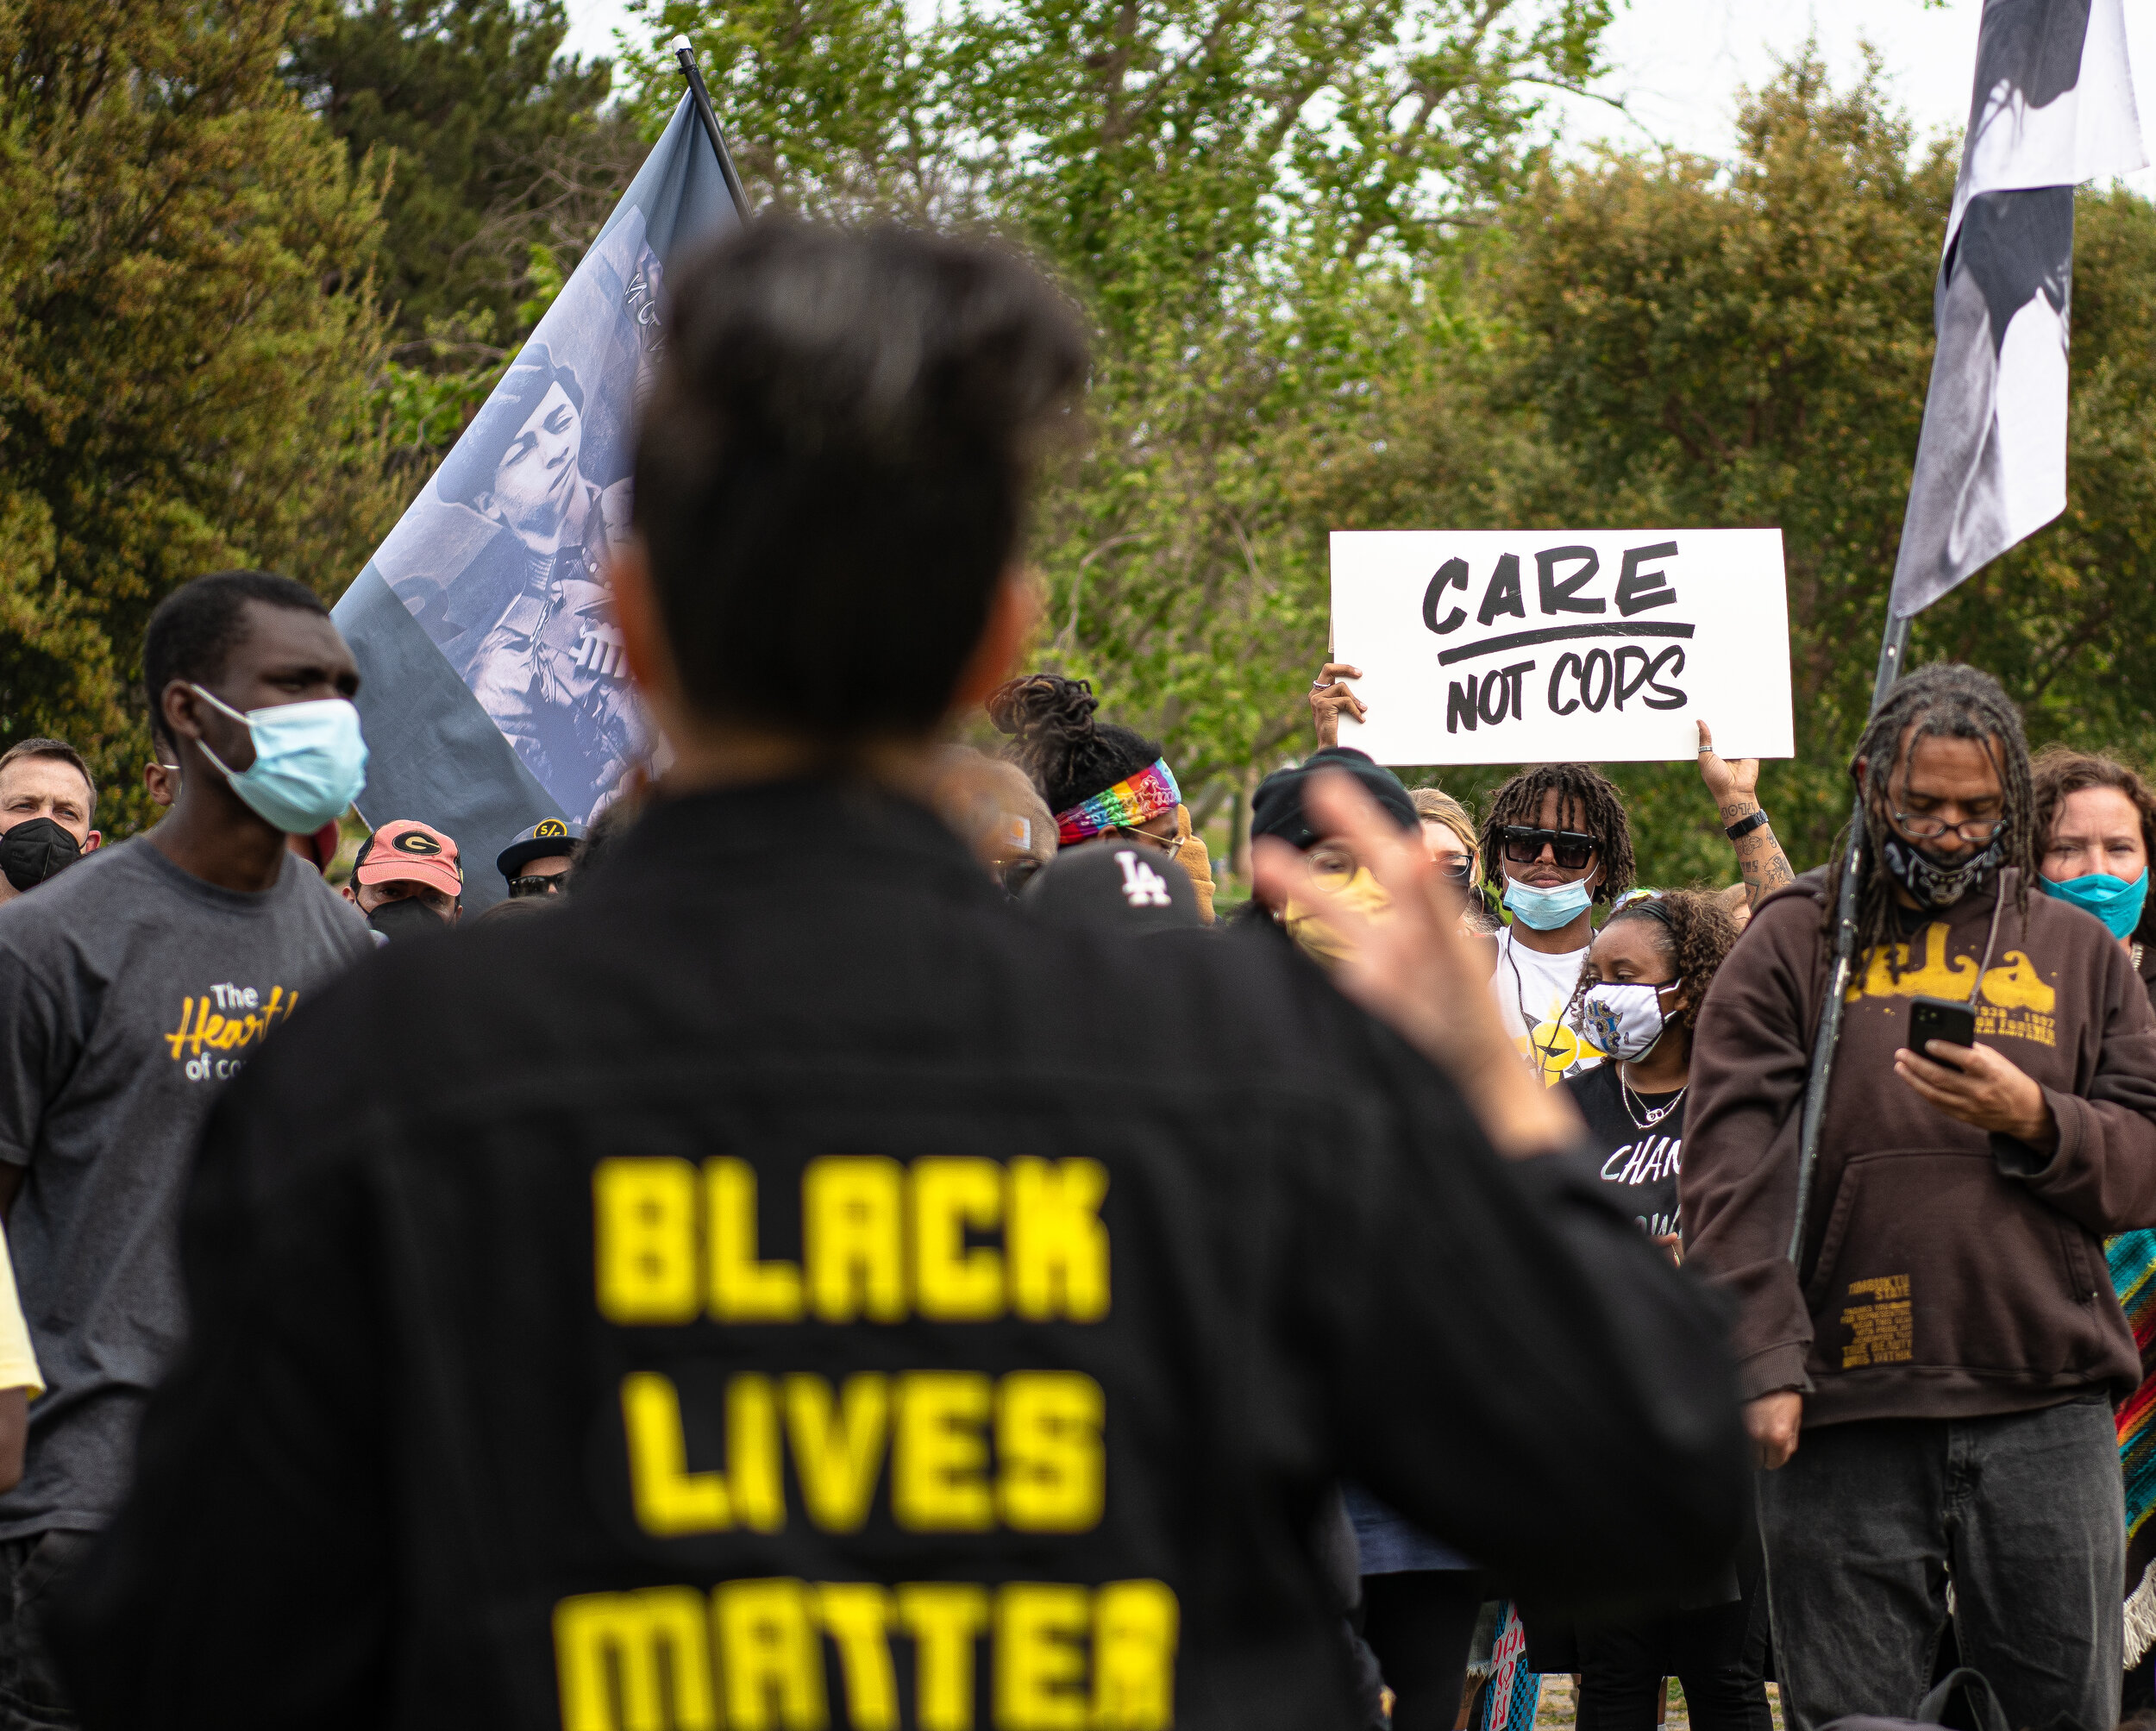  Black Lives Matter supporters listen in on a powerful message from a Black Lives Matter representative on April 25, 2021, in Hollywood Calif. (Jon Putman / The Corsair) 